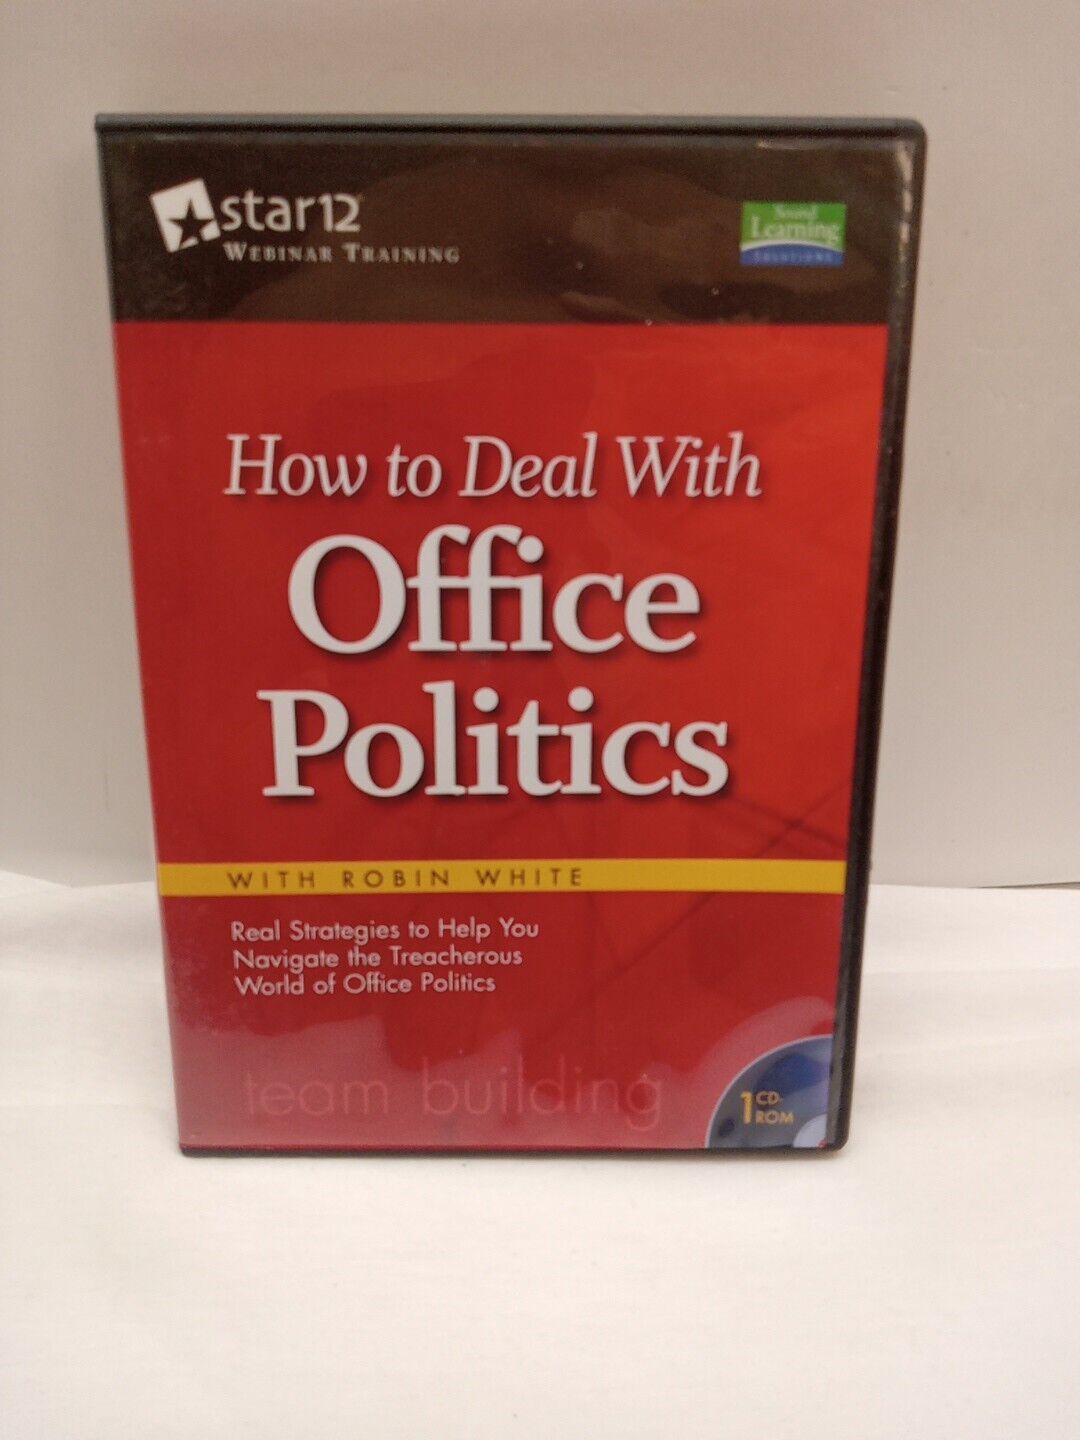 Star12 - How to Deal with Office Politics (CD-ROM, 2011)